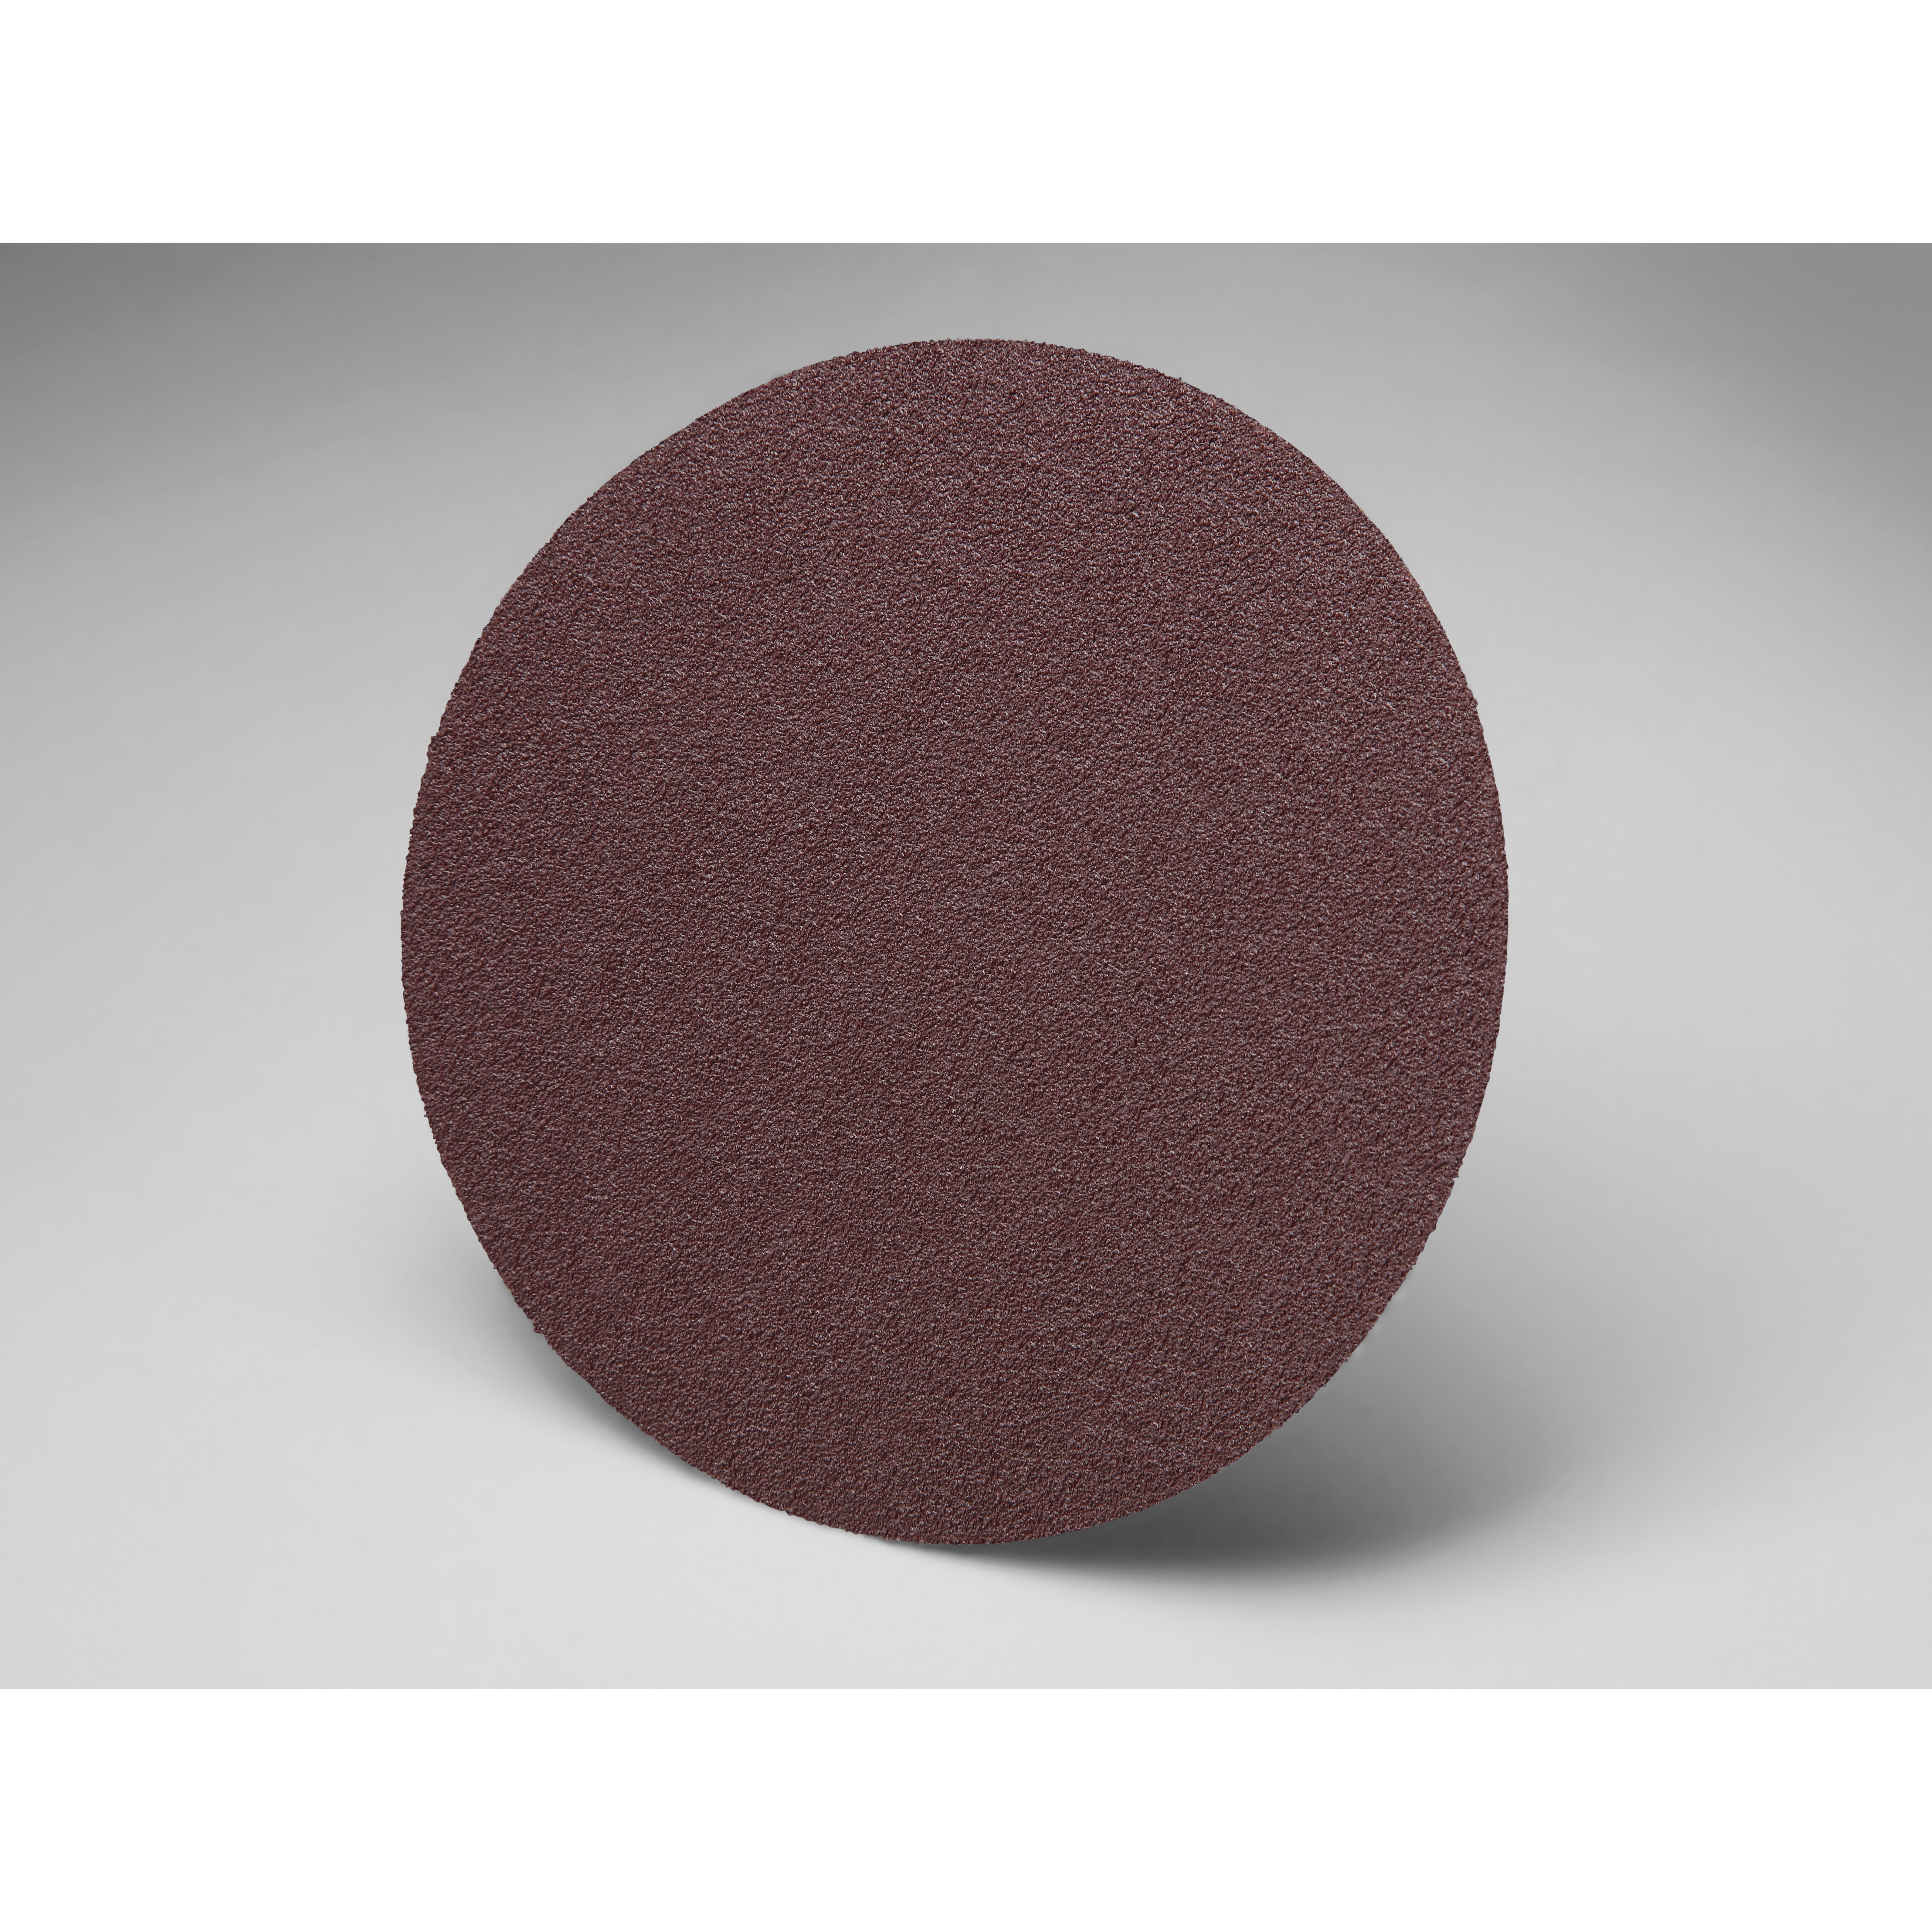 3M™ 051144-20928 348D Heavy Duty PSA Mounted Point, 1 in Dia Disc, P180 Grit, Very Fine Grade, Aluminum Oxide Abrasive, Cloth Backing